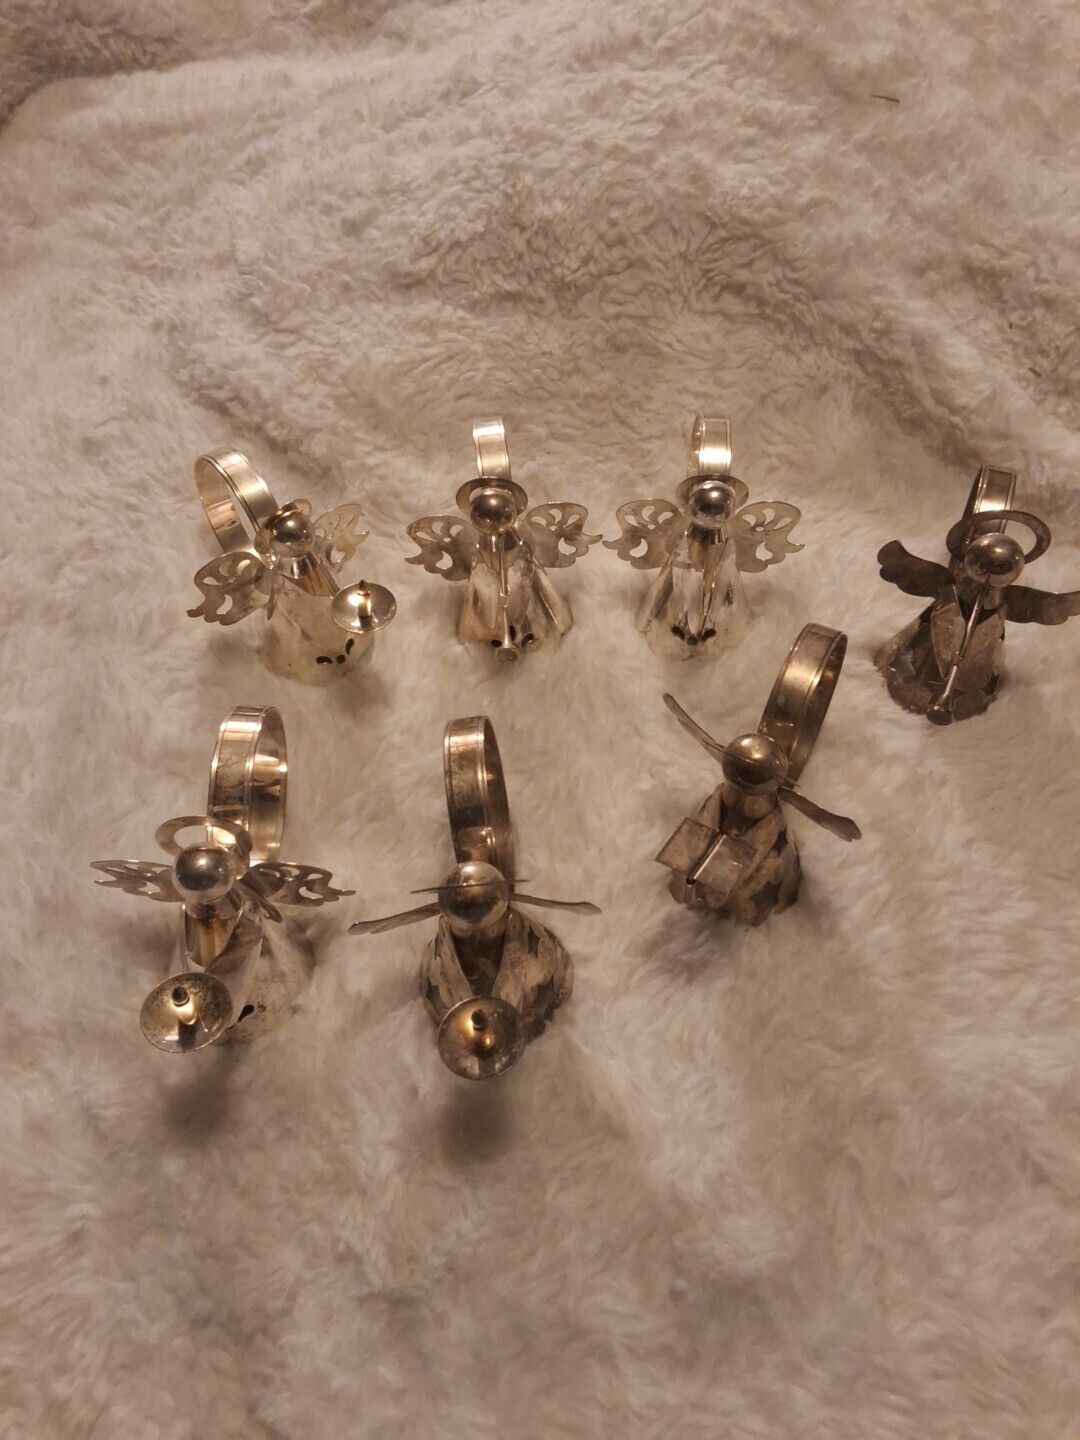 Vintage Regal Silver Angel Napkin Holders Rings Silver-Plated 1985 Set of 7